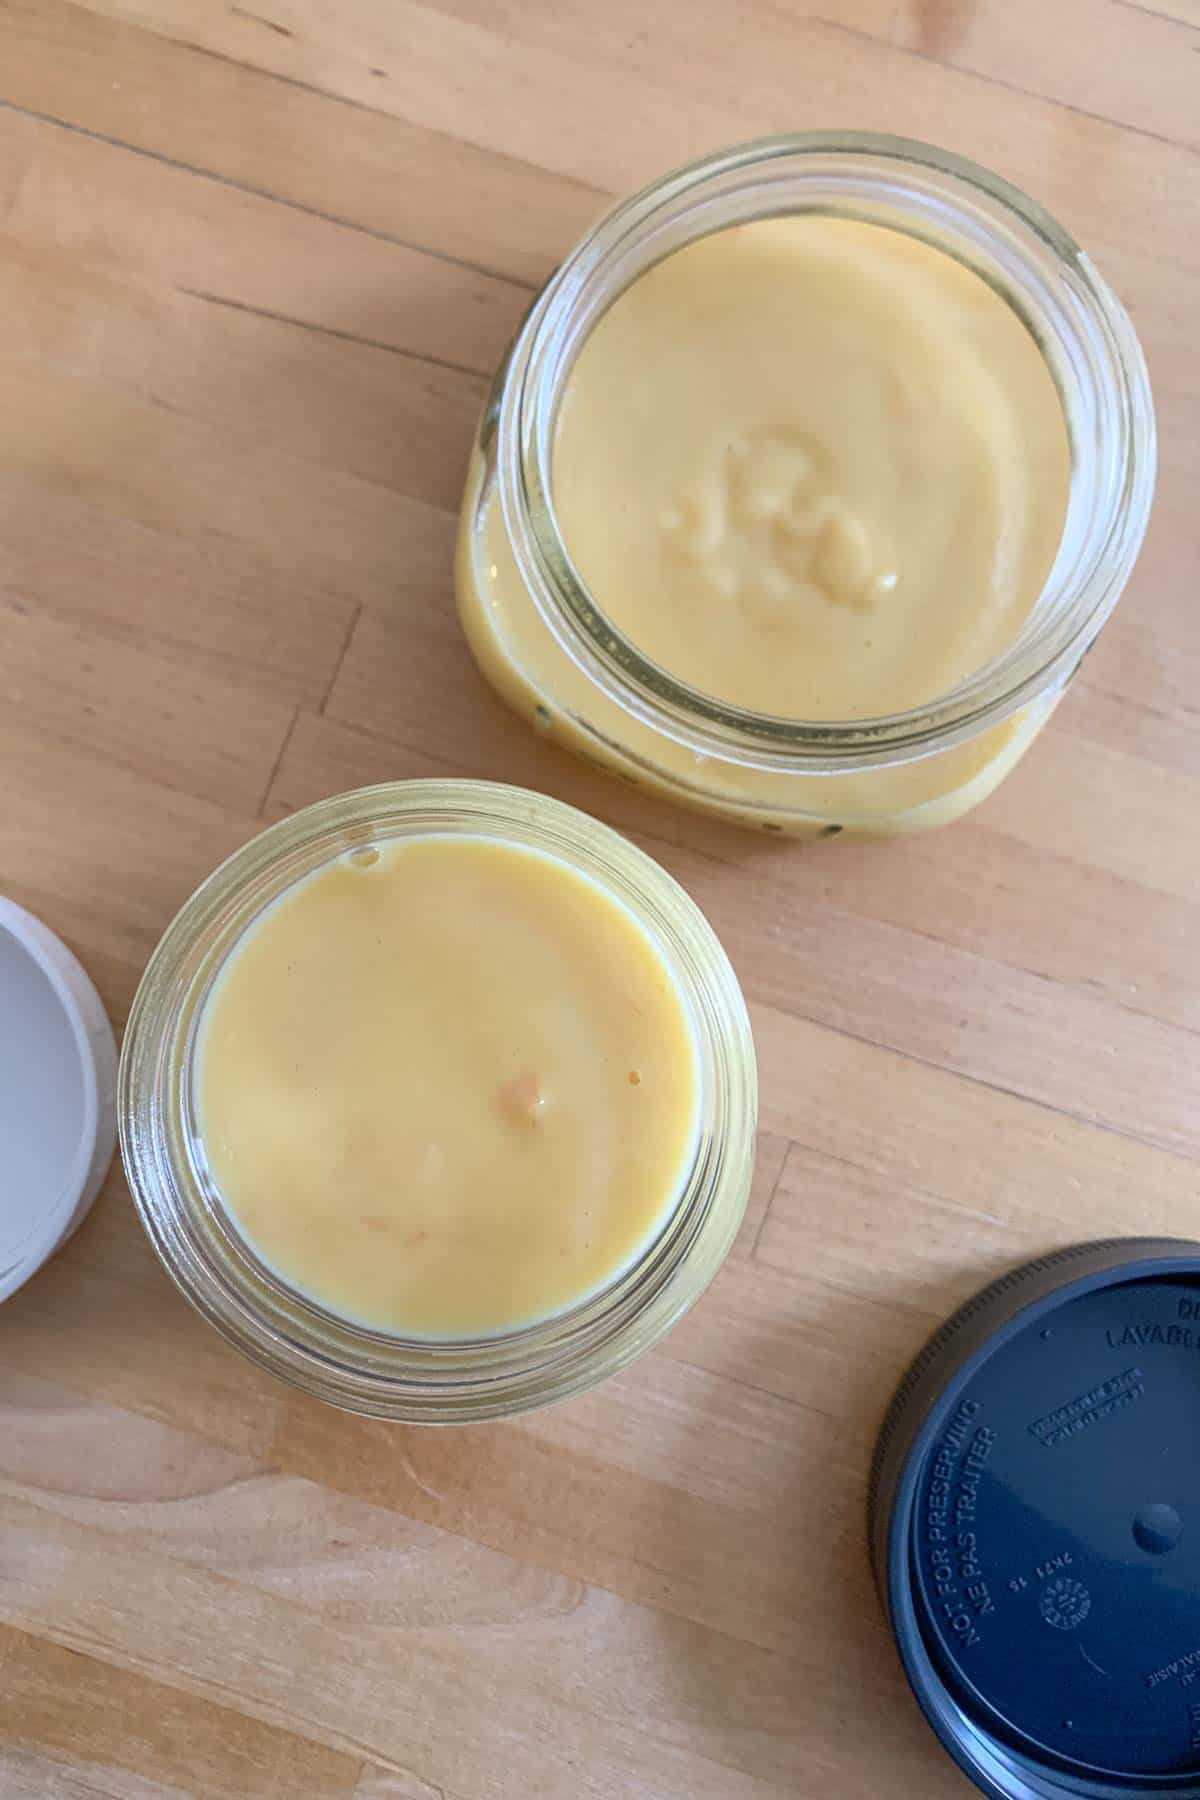 Grapefruit curd in jars on a wooden counter.